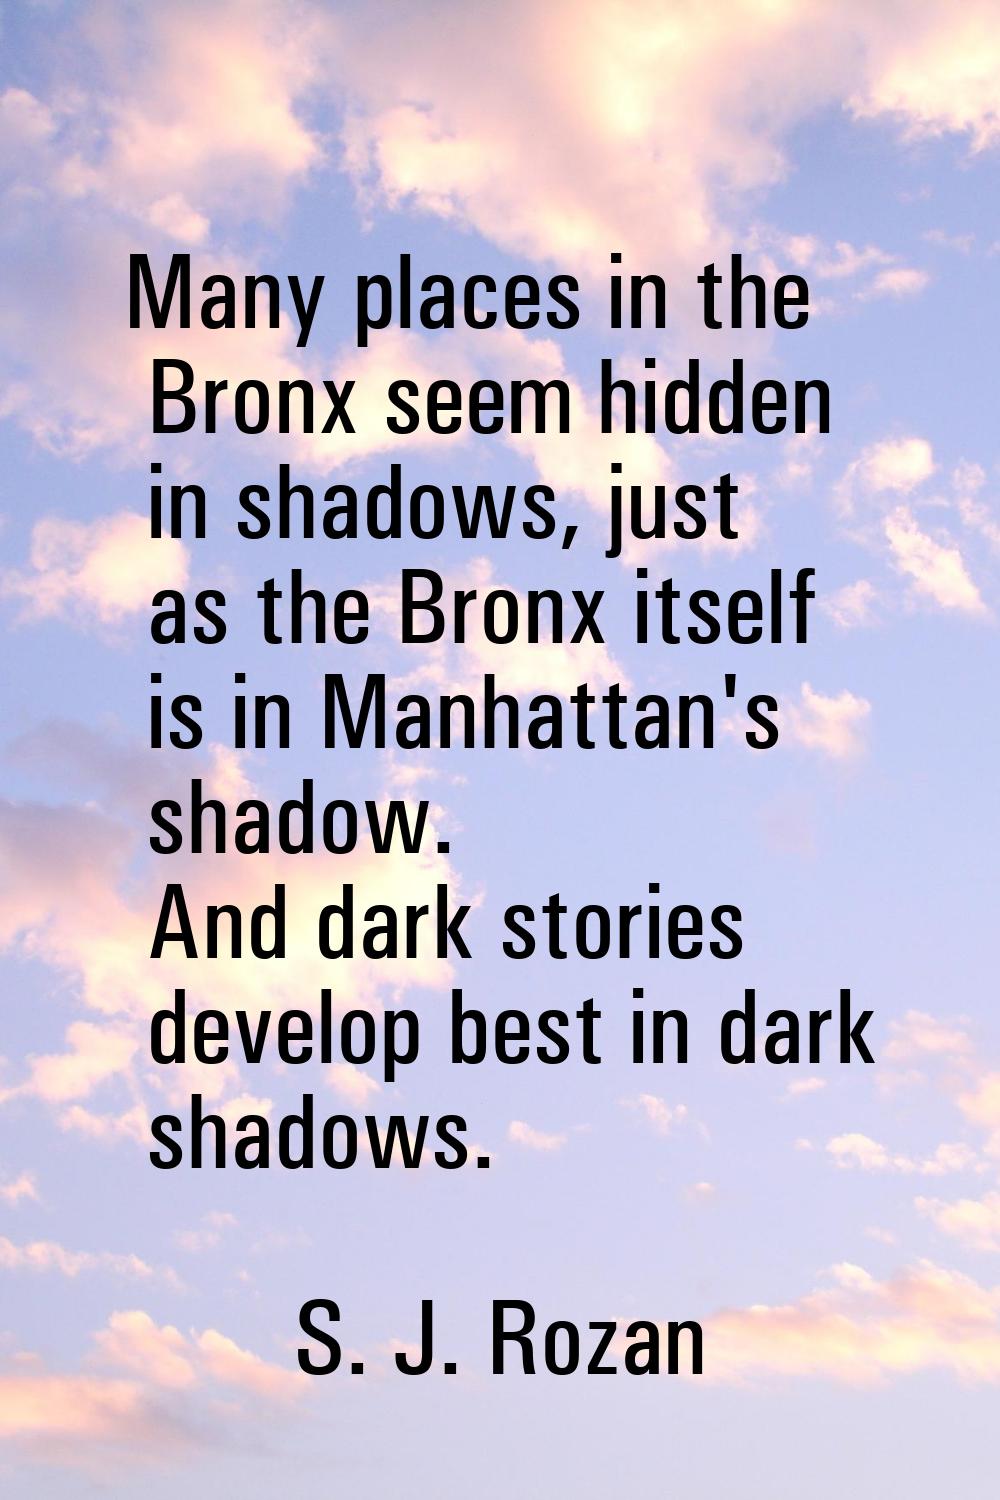 Many places in the Bronx seem hidden in shadows, just as the Bronx itself is in Manhattan's shadow.